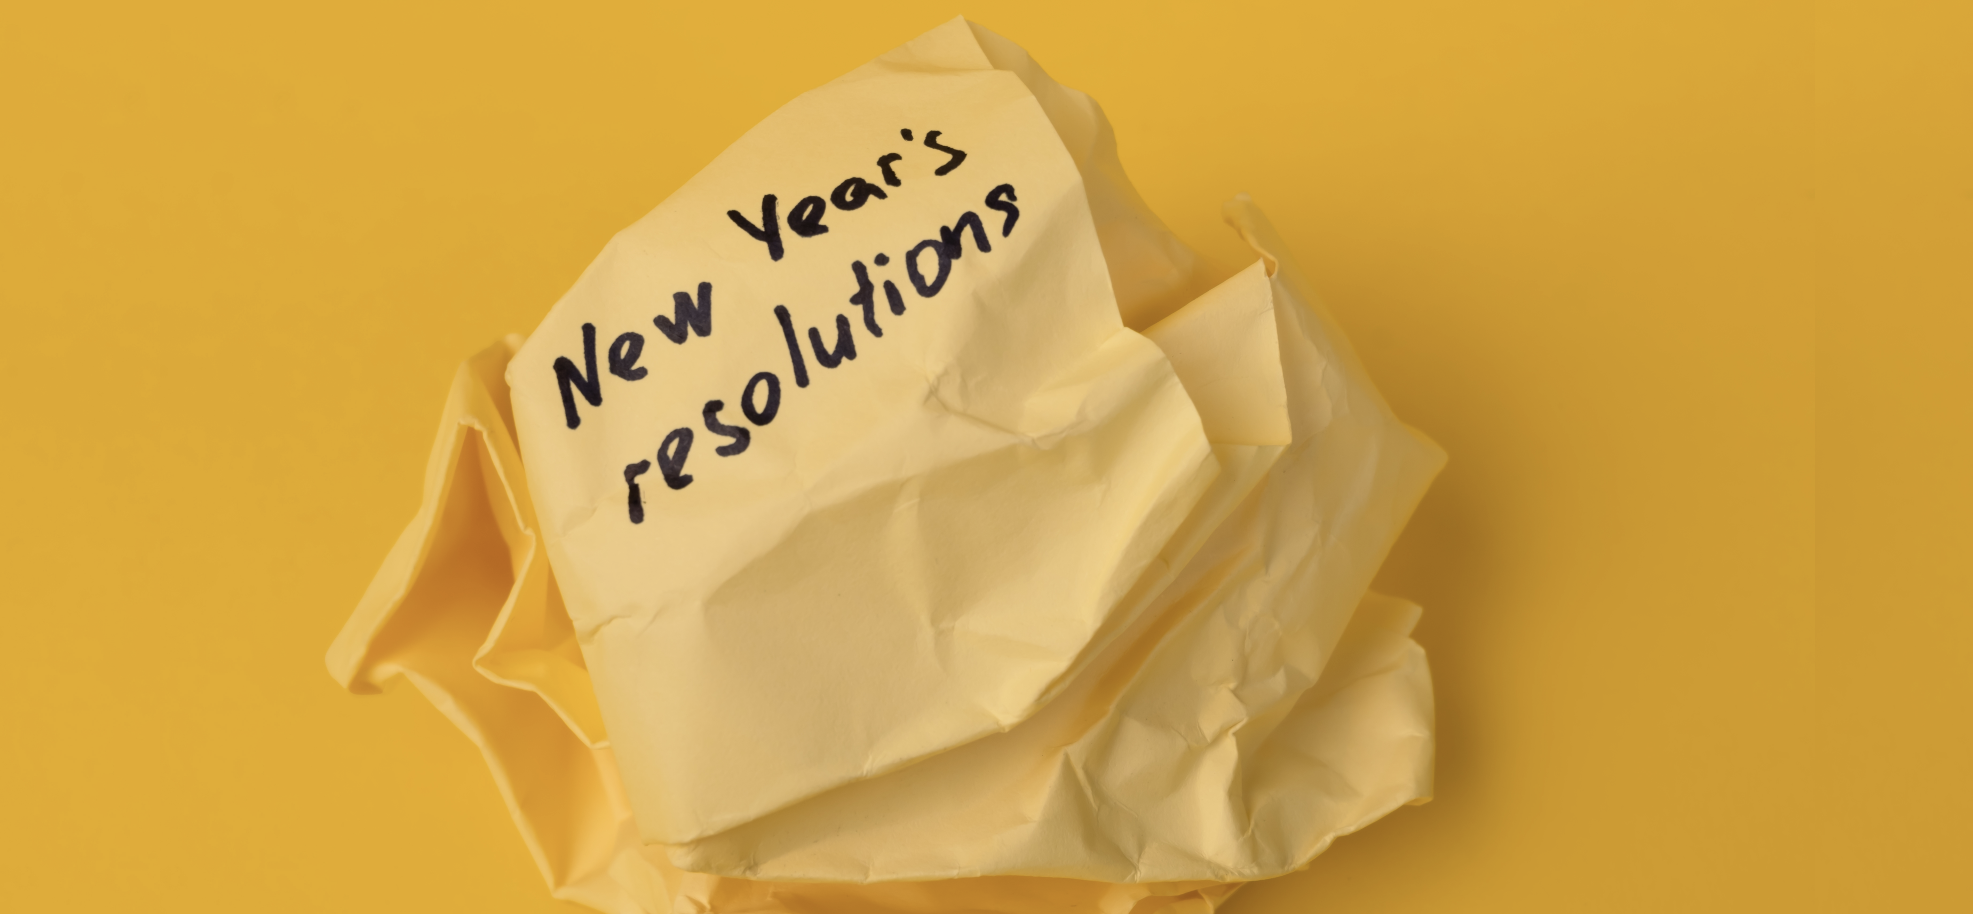 Achieving success with New Year’s resolutions